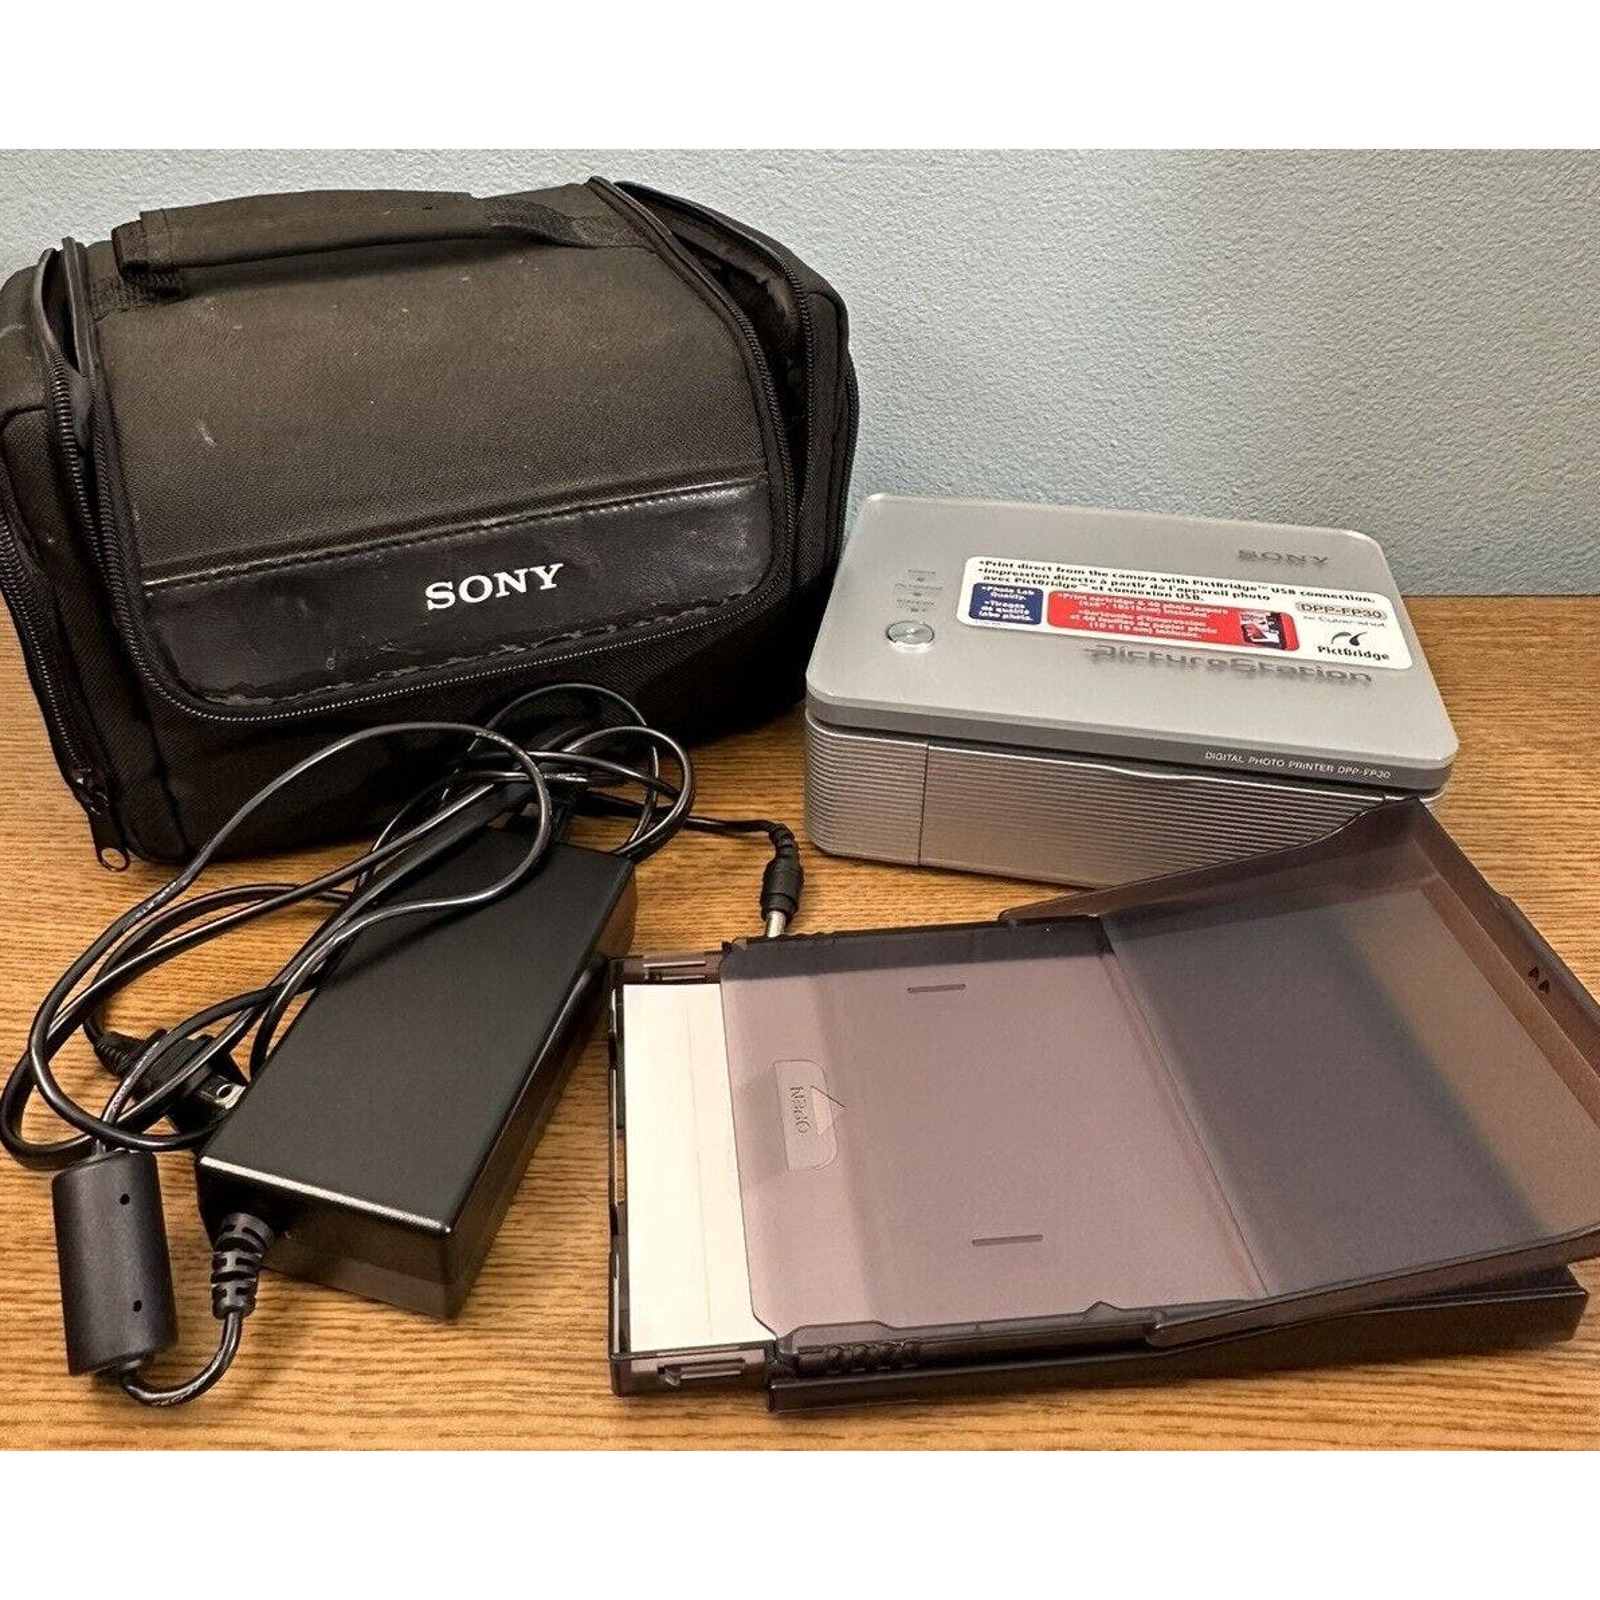 Sony Picture Station Printer & Power Supply DPP-FP30 With Extra Paper & Case